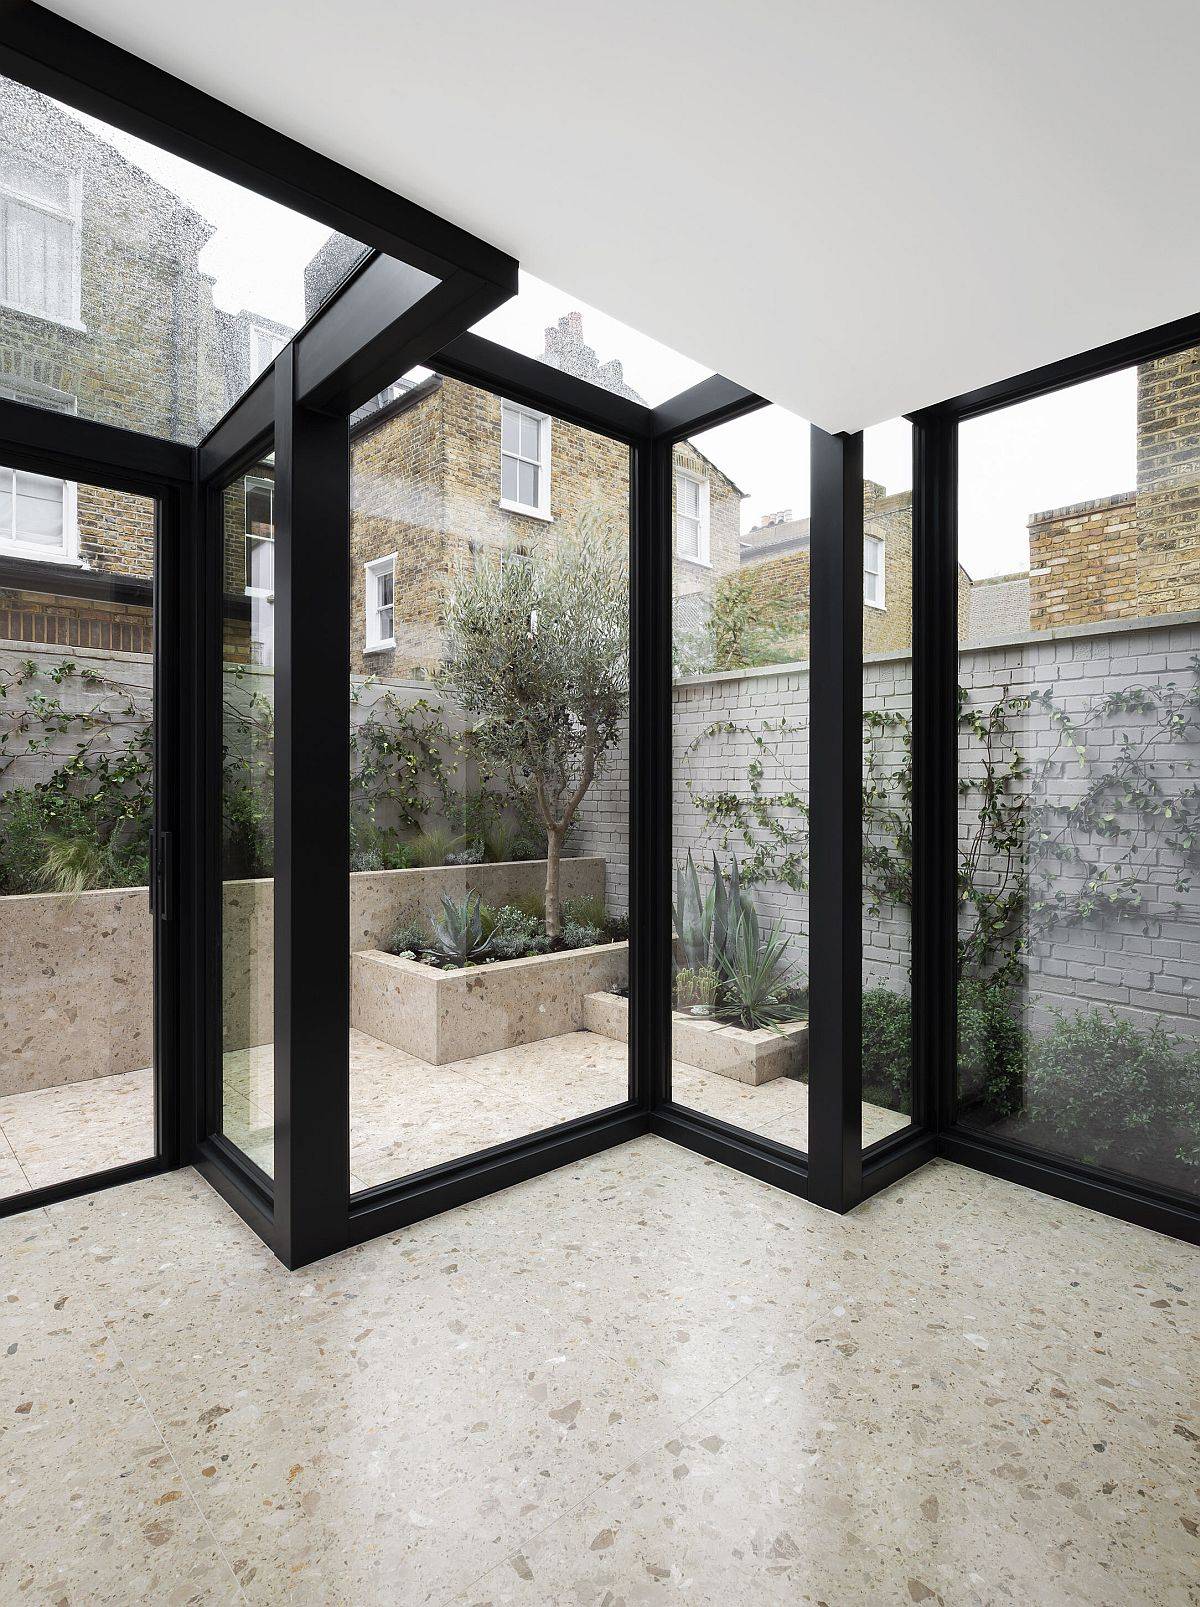 Glass-boxes-with-metal-frame-extend-the-traditional-home-in-a-creative-manner-71628